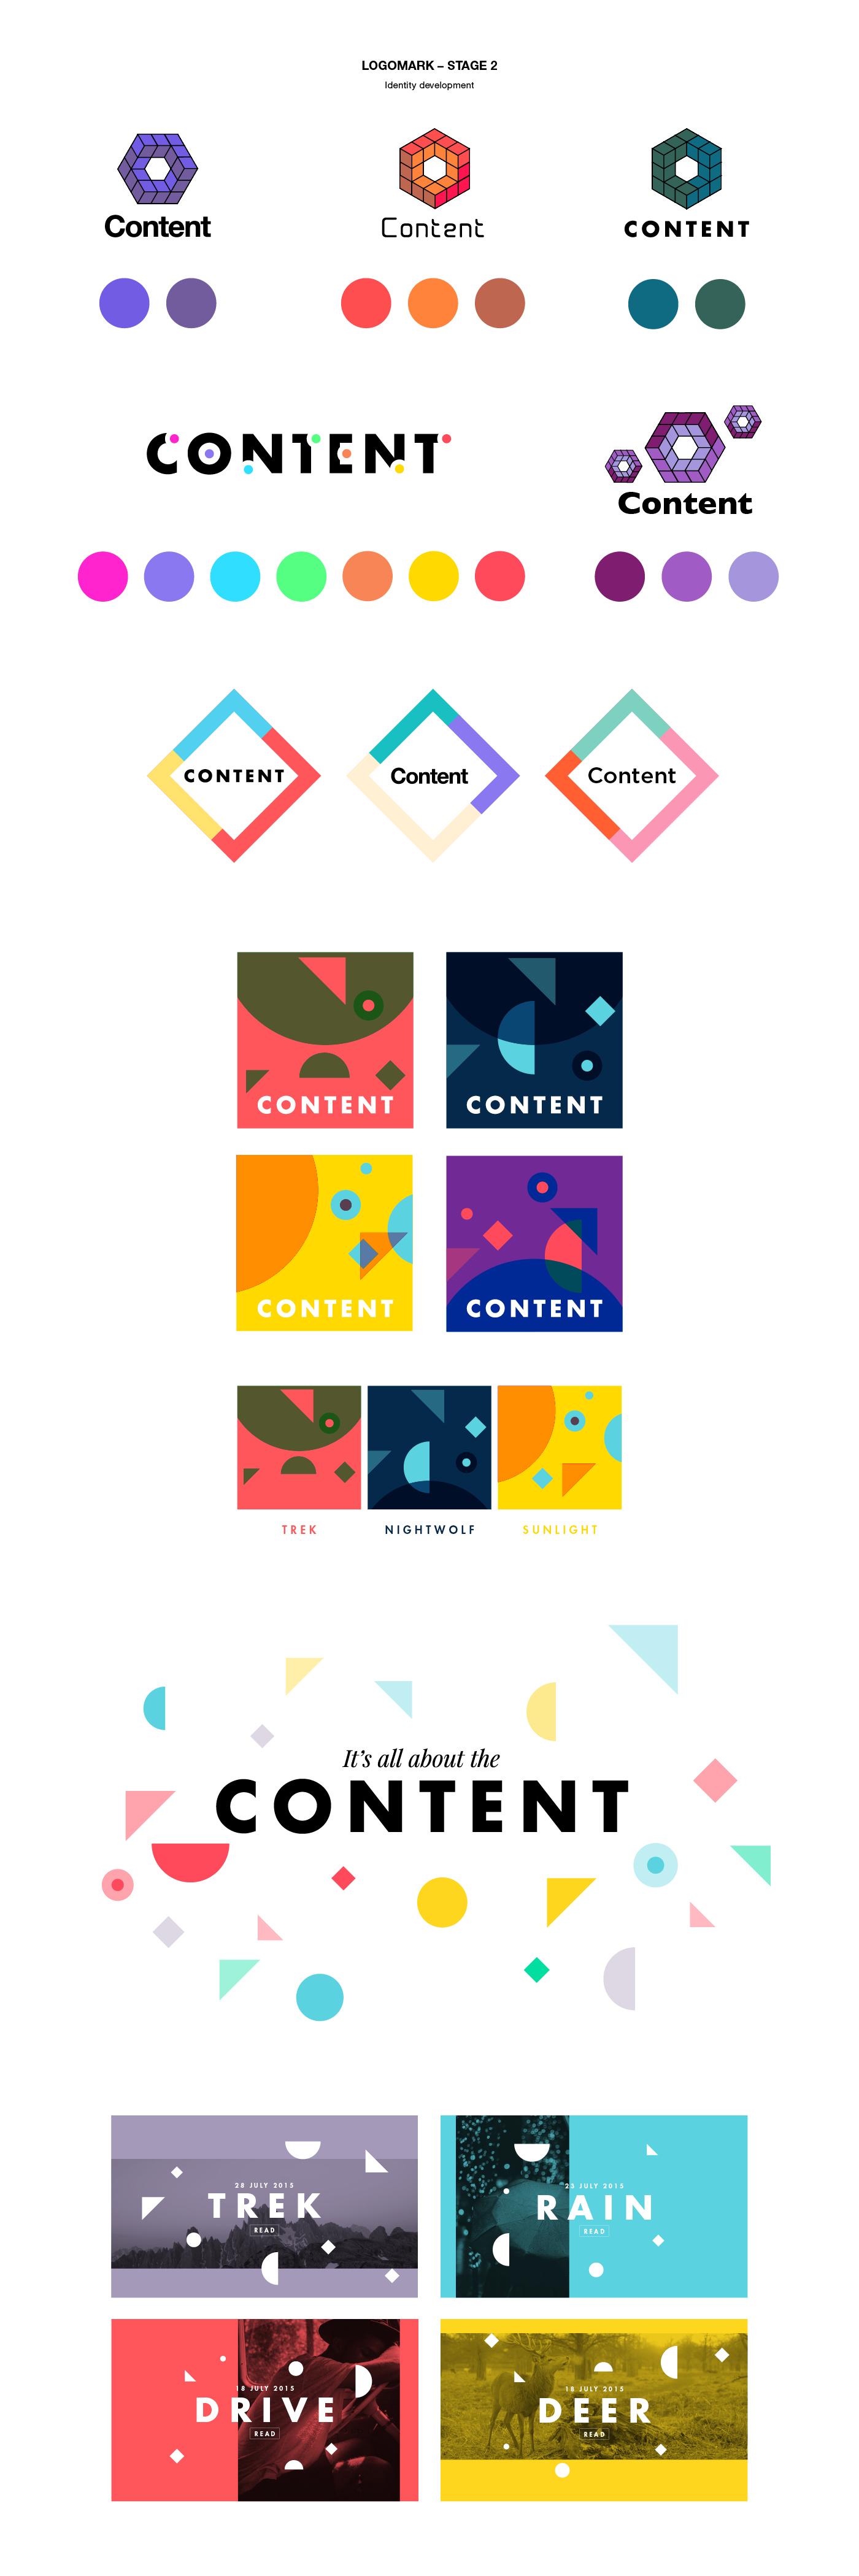 brand colour color shapes icons content Stationery brochure guidelines logo identity type logmark mark iconography